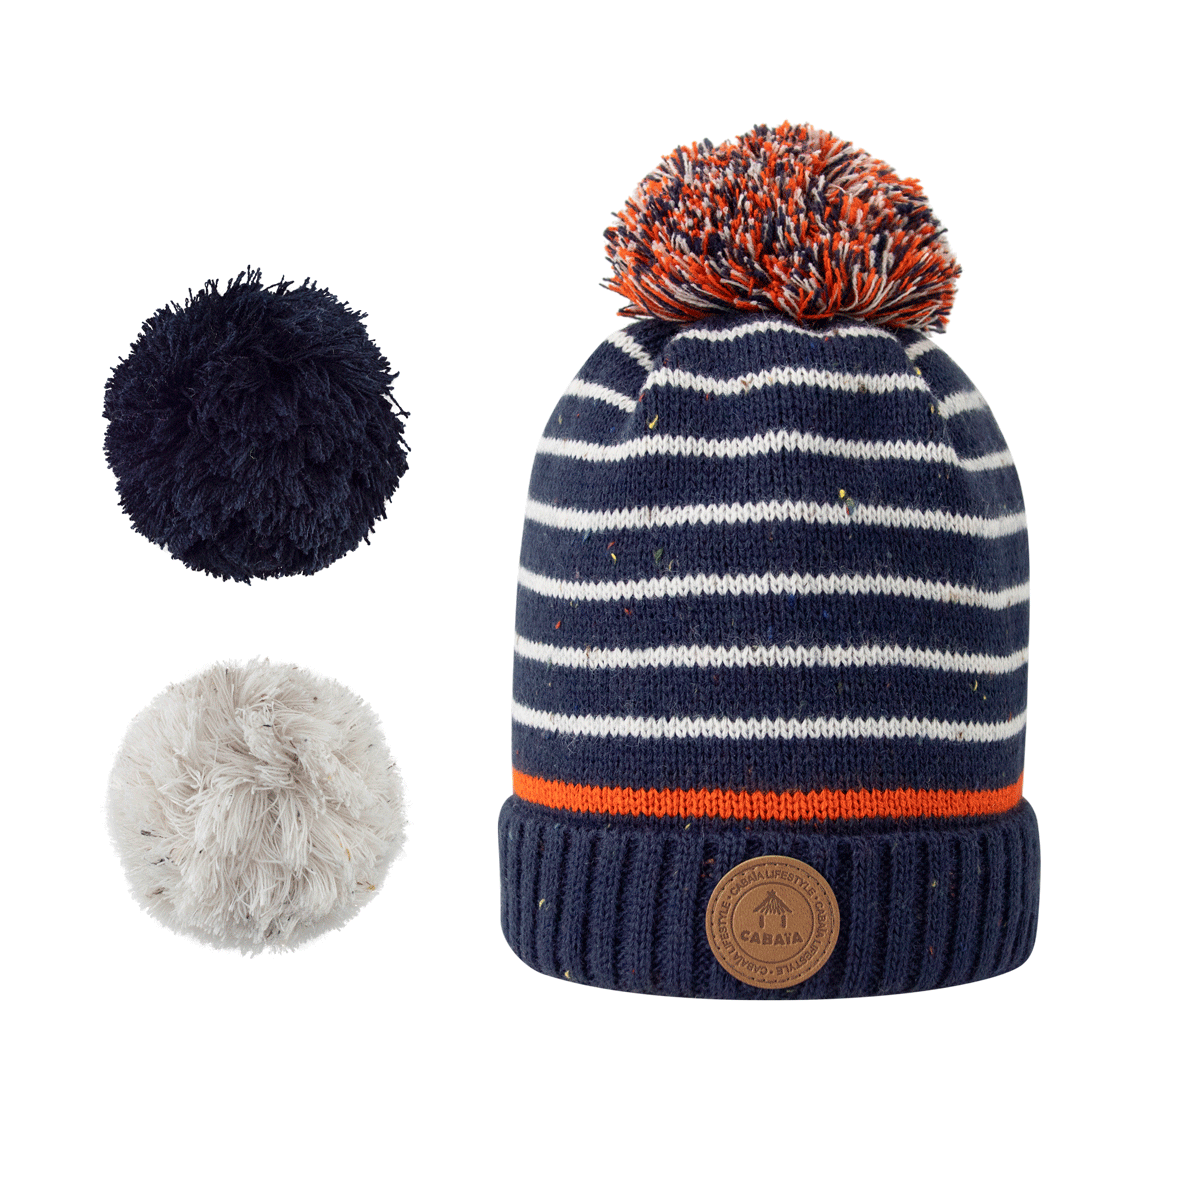 hat-red-lion-navy-cabaia